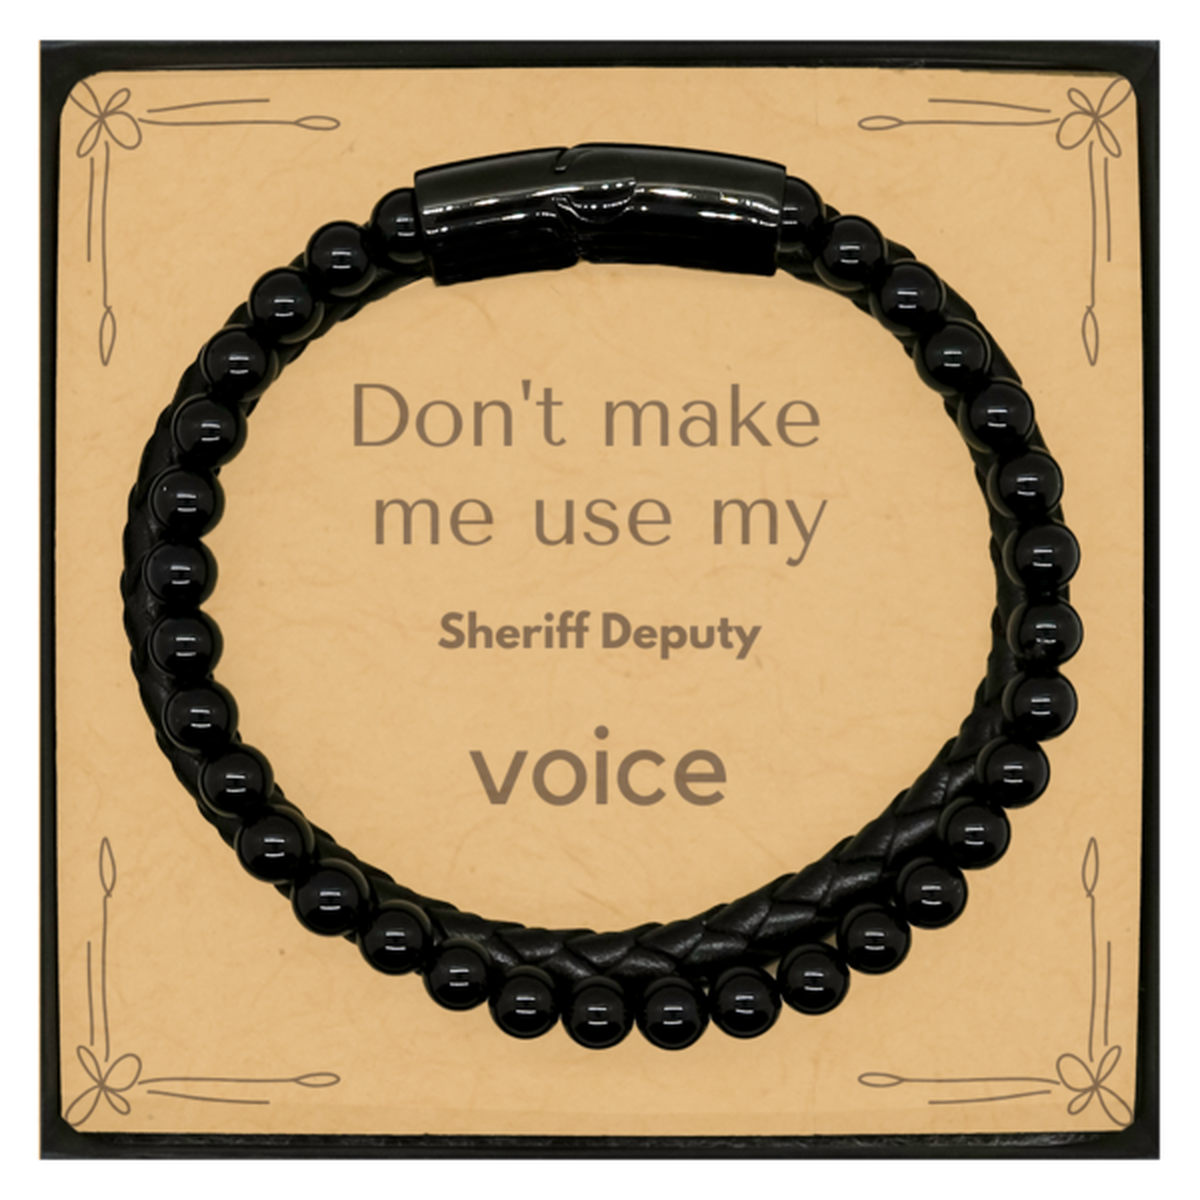 Don't make me use my Sheriff Deputy voice, Sarcasm Sheriff Deputy Card Gifts, Christmas Sheriff Deputy Stone Leather Bracelets Birthday Unique Gifts For Sheriff Deputy Coworkers, Men, Women, Colleague, Friends